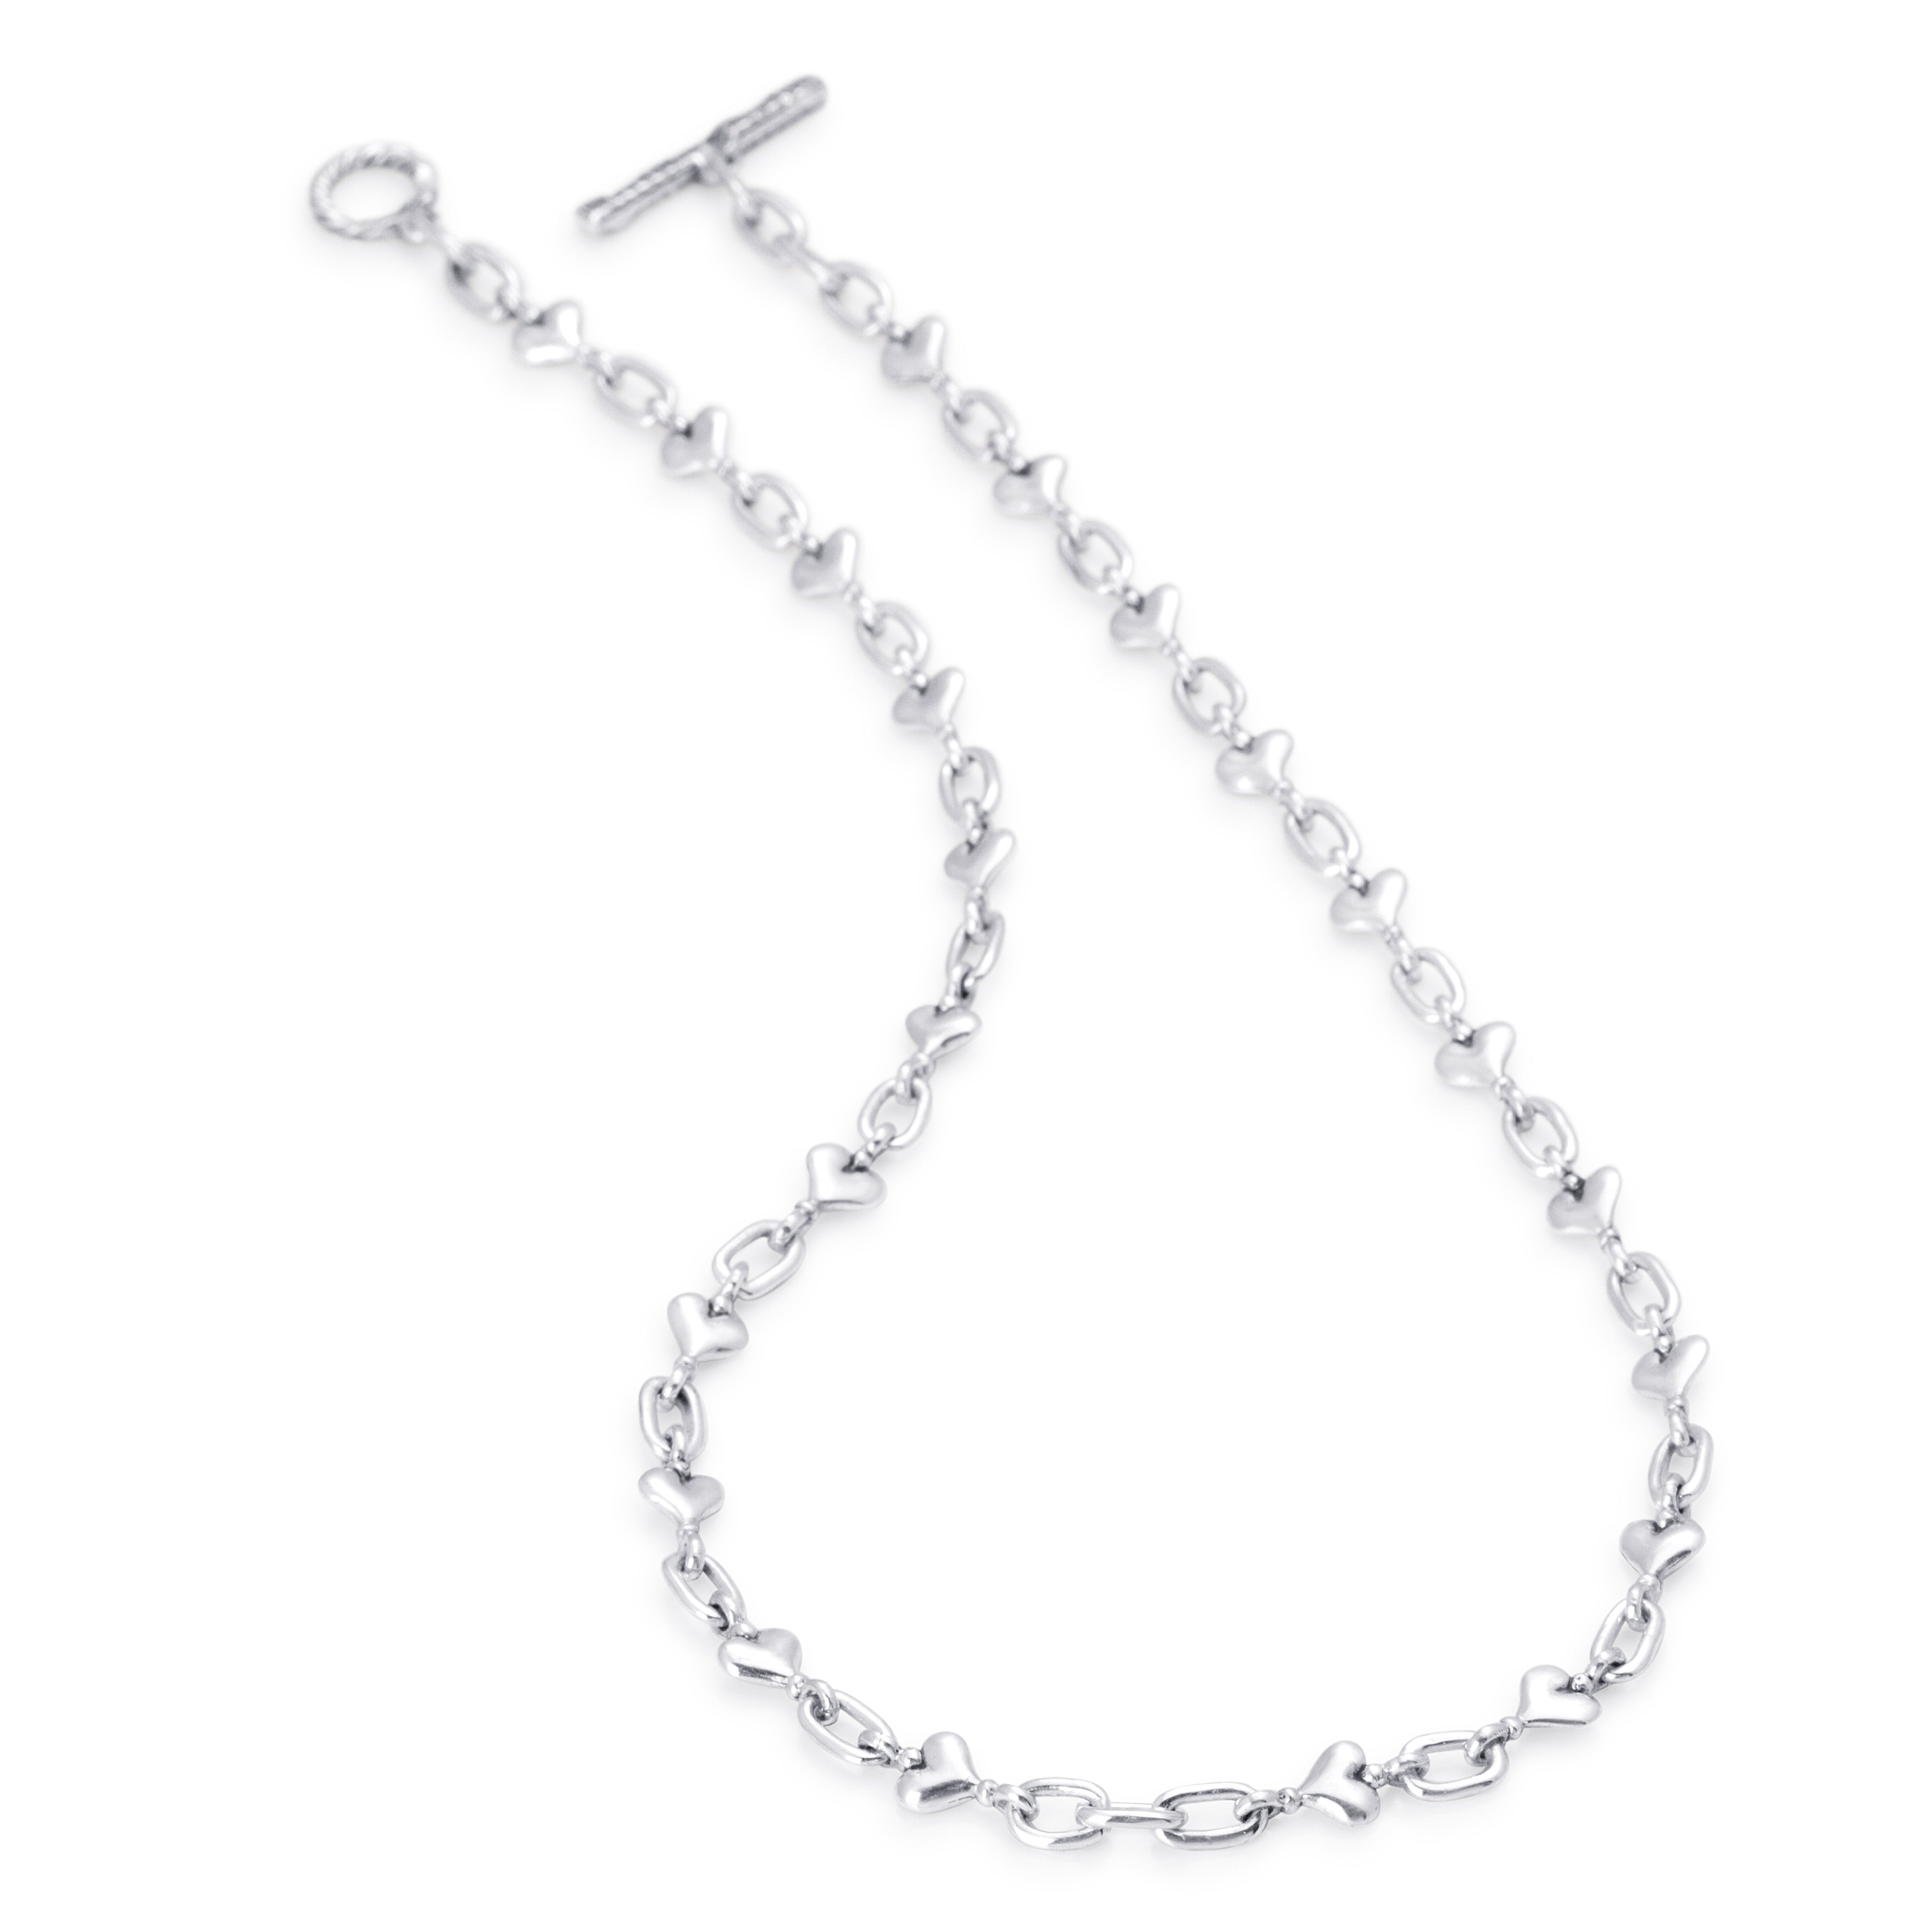 Solid Sterling Silver small heart links joined with classic open links, T-toggle clasp 